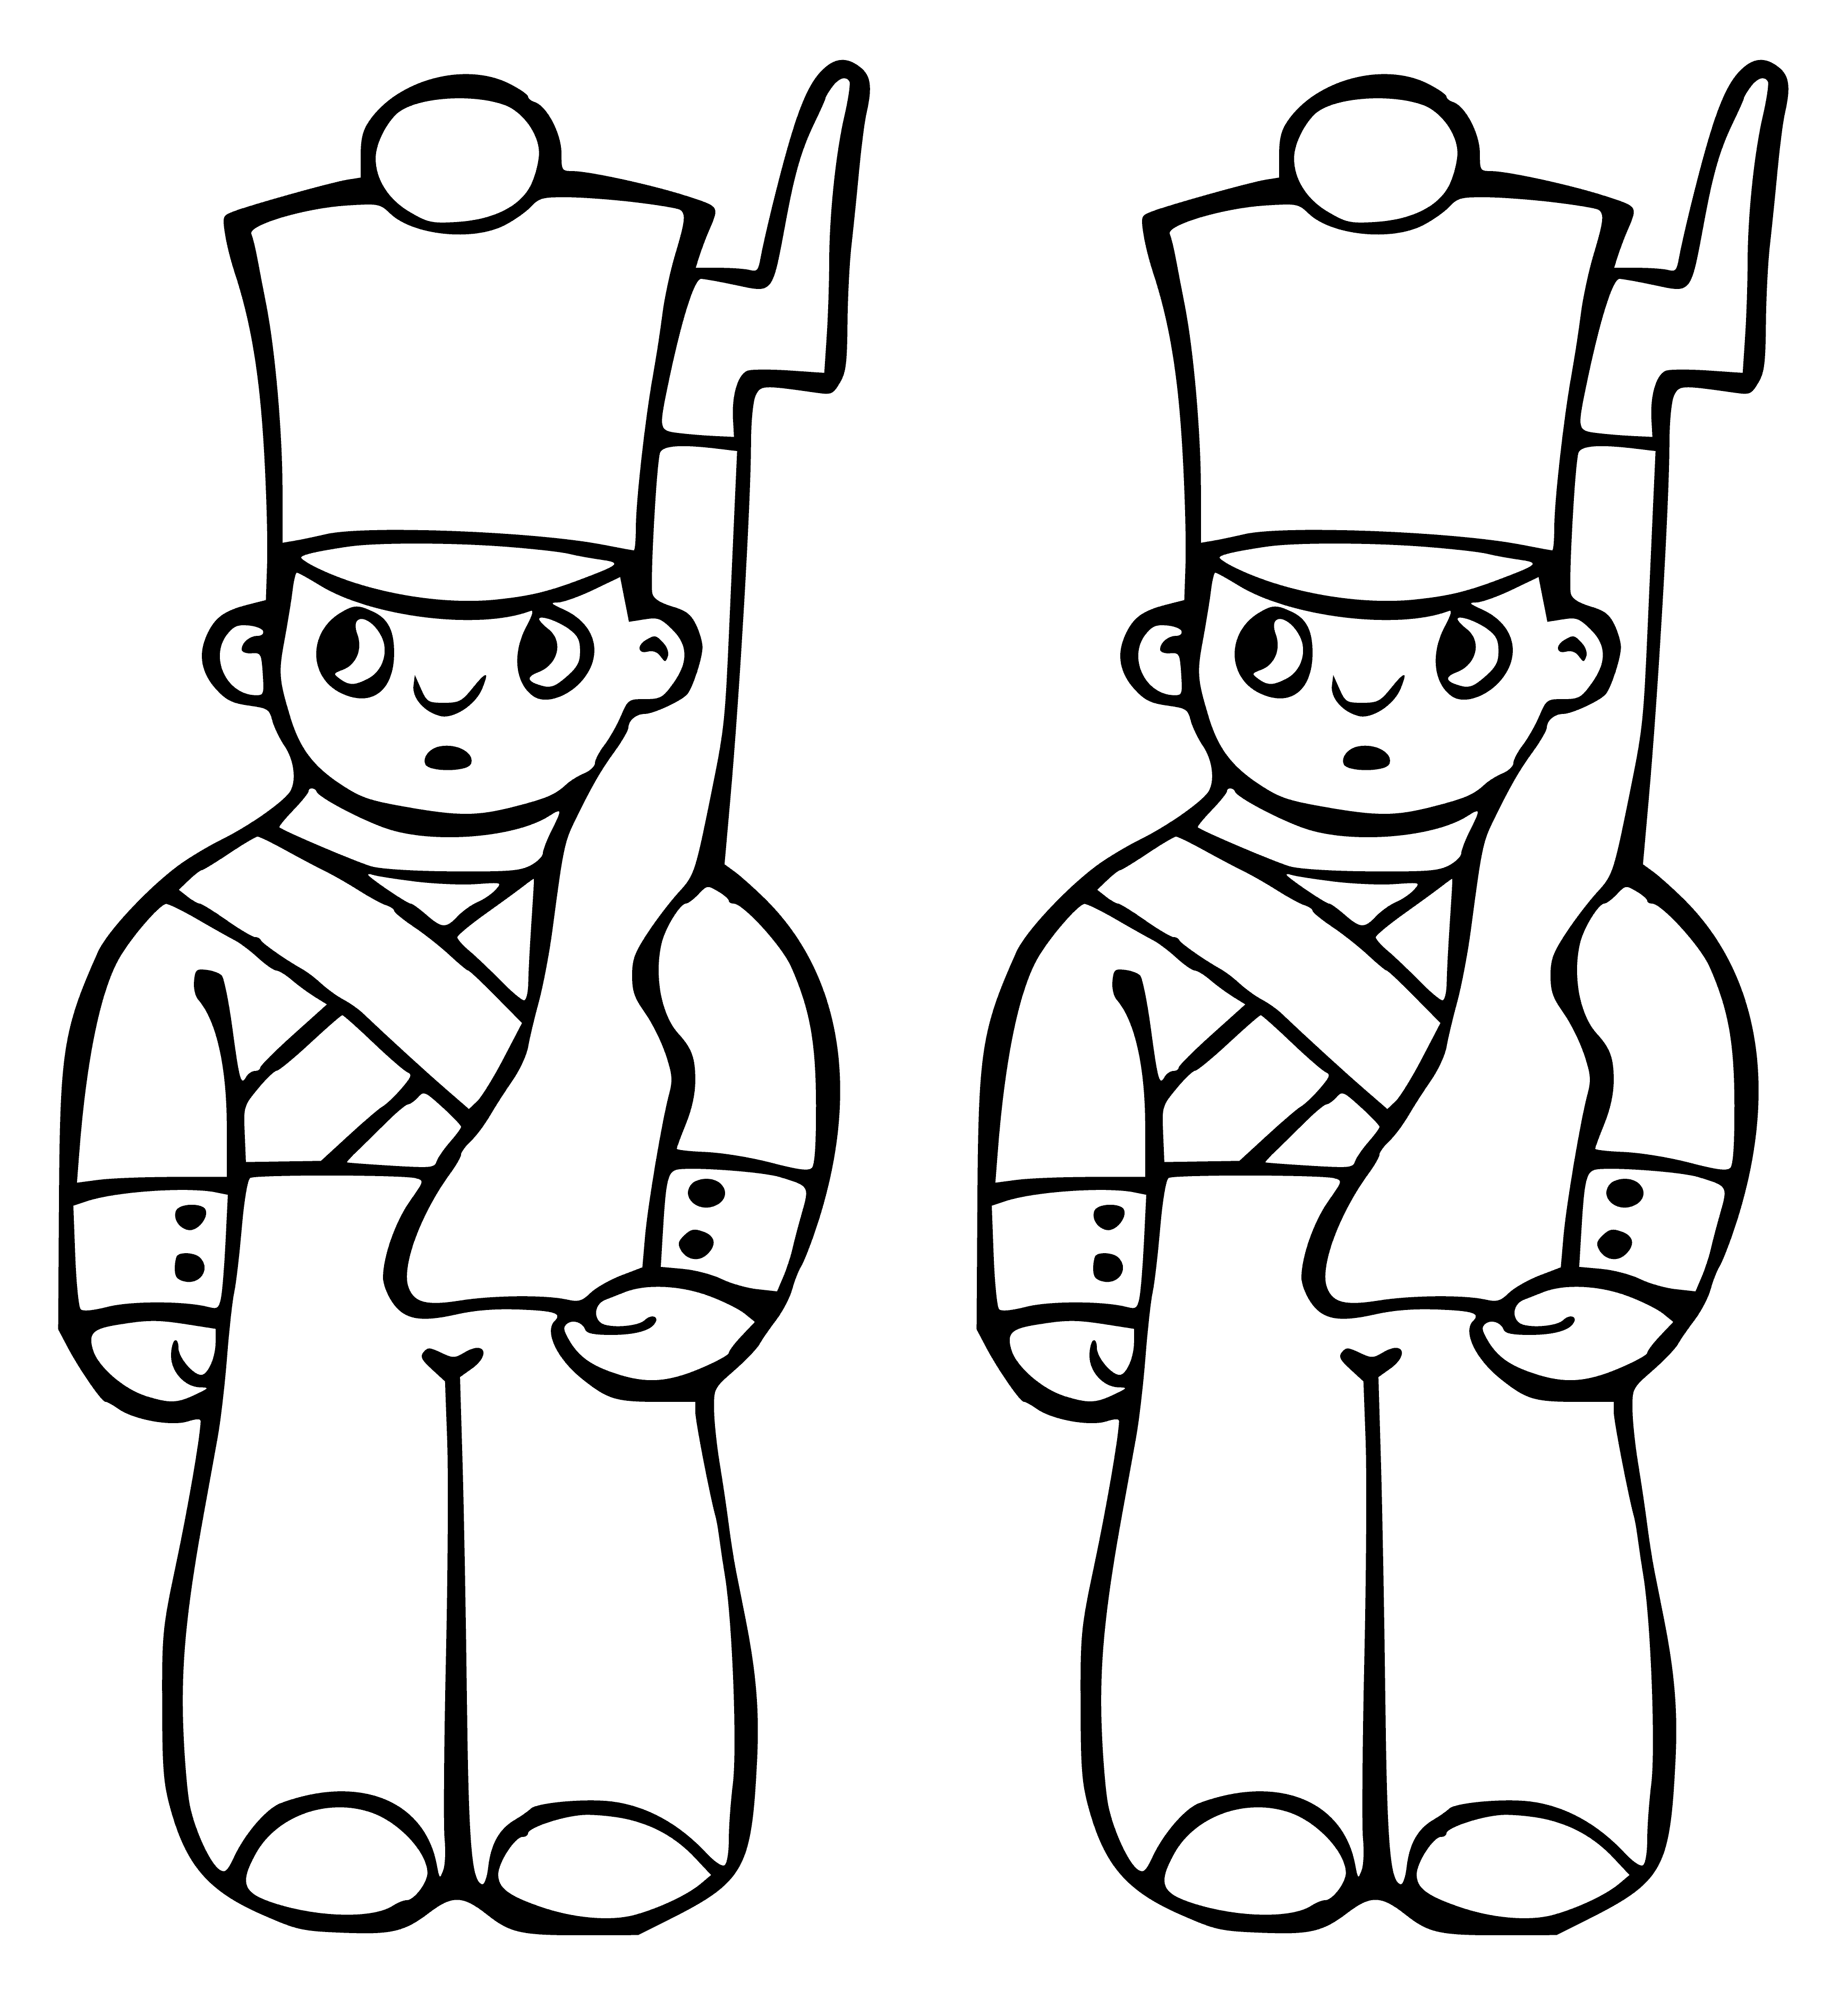 coloring page: Five plastic toy soldiers in various poses with guns, three standing, two kneeling and one lying down.